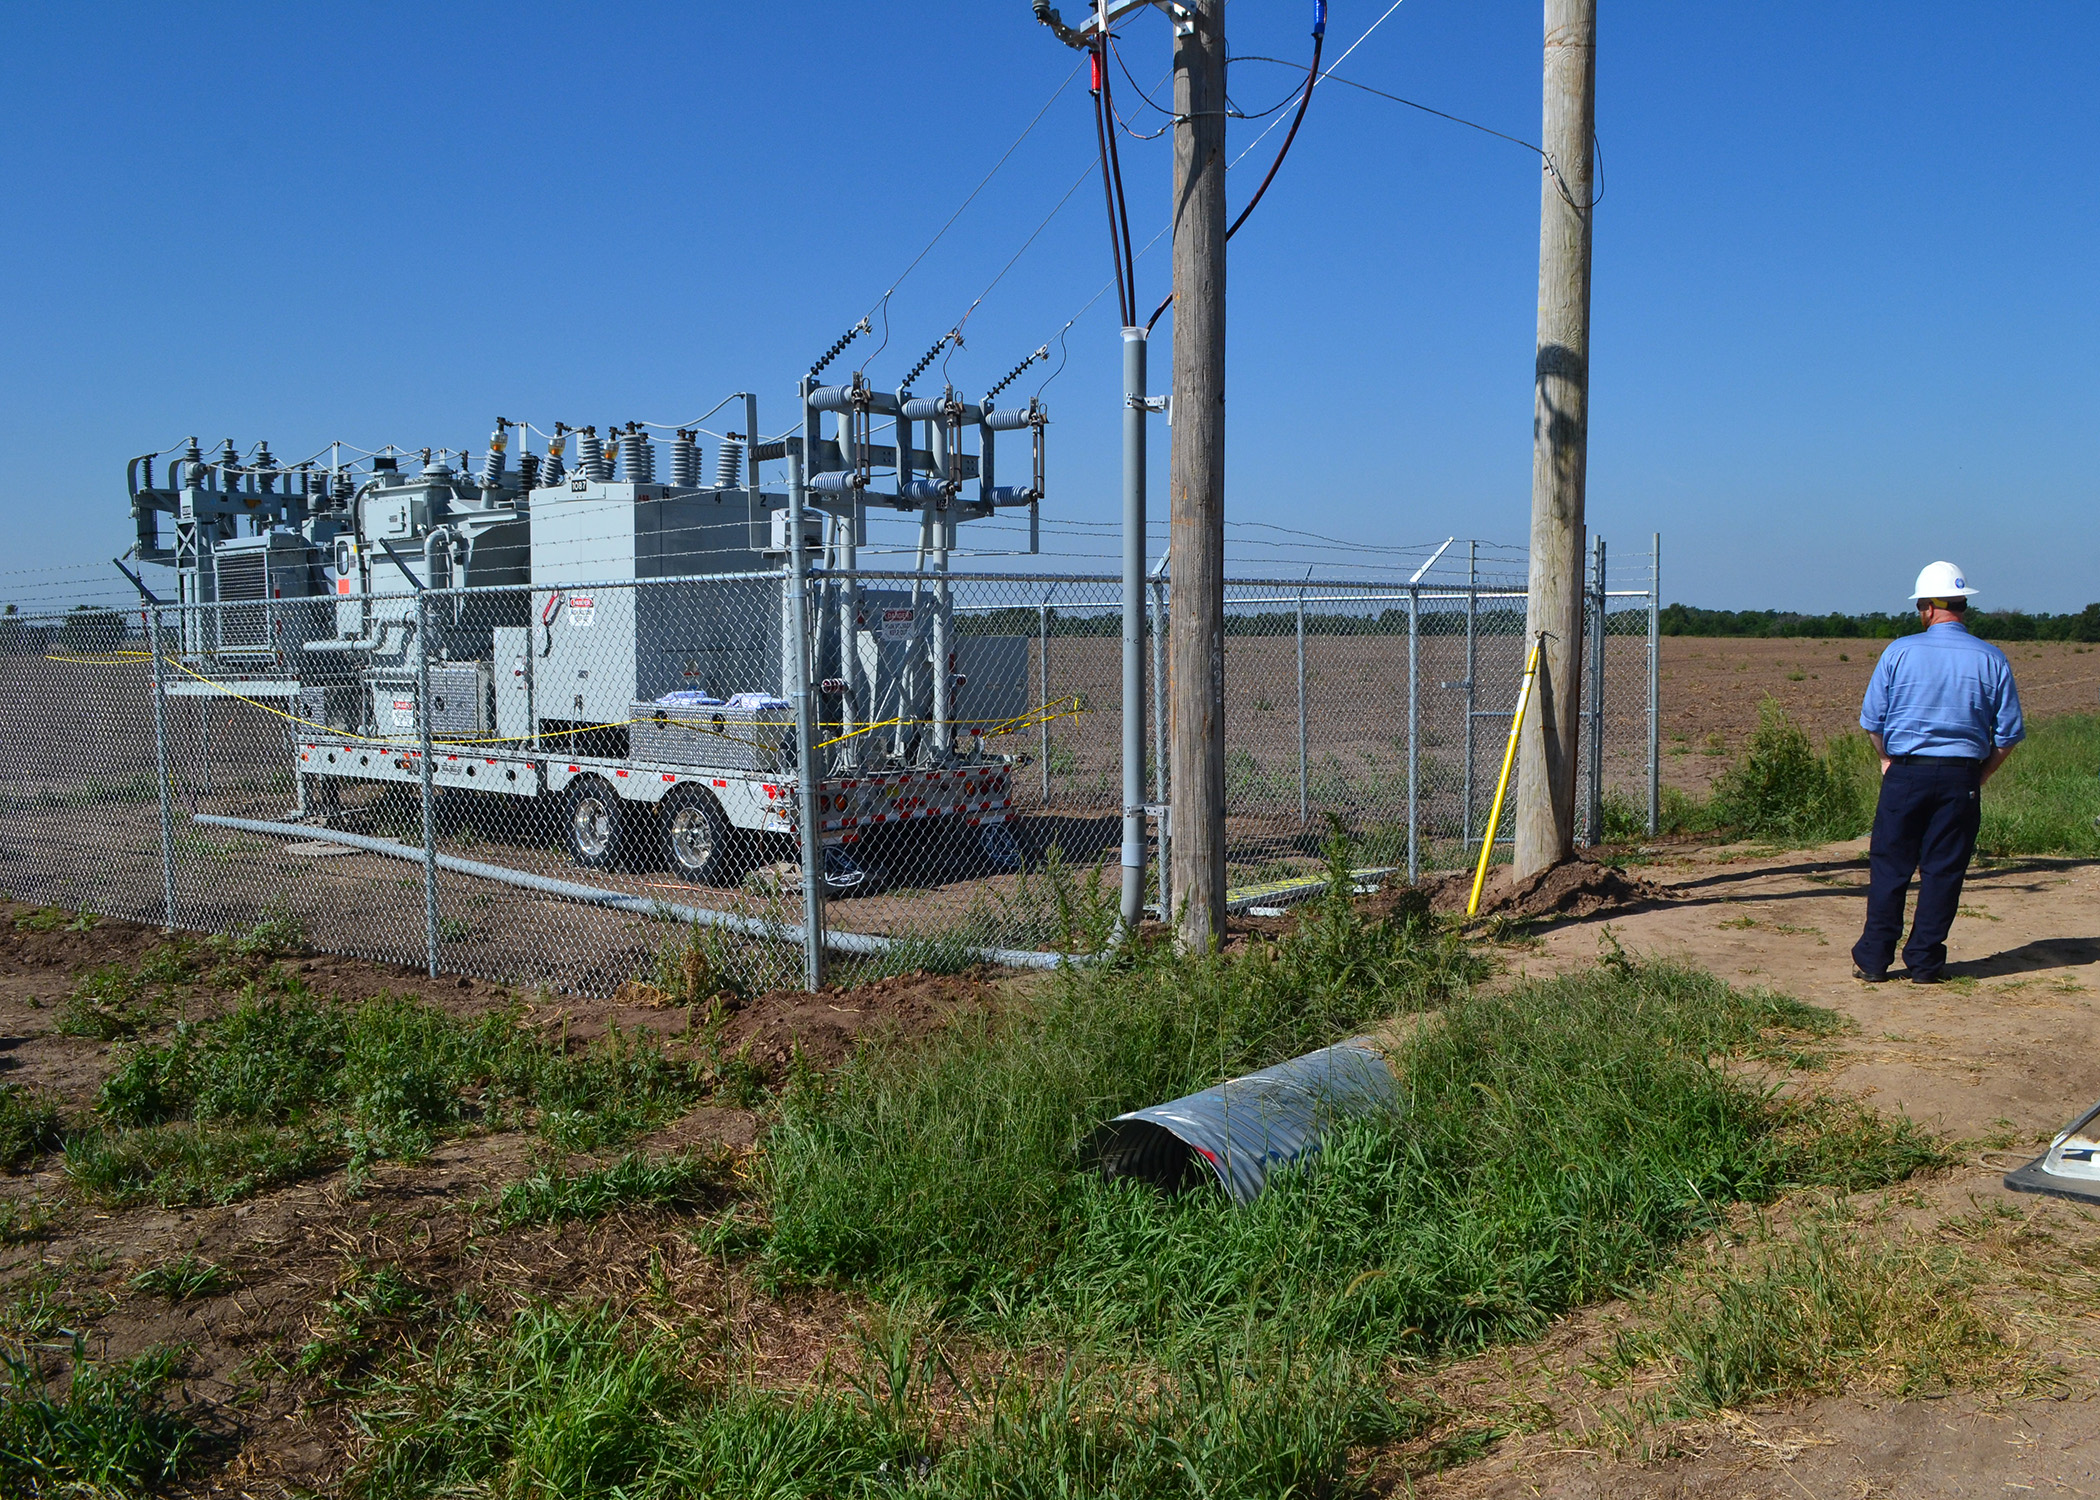 An image of a mobile electric substation, parked within a chain-link fence enclosure next to two power poles; a lineman in a blue shirt stands in a roadway and looks inward at the setup.